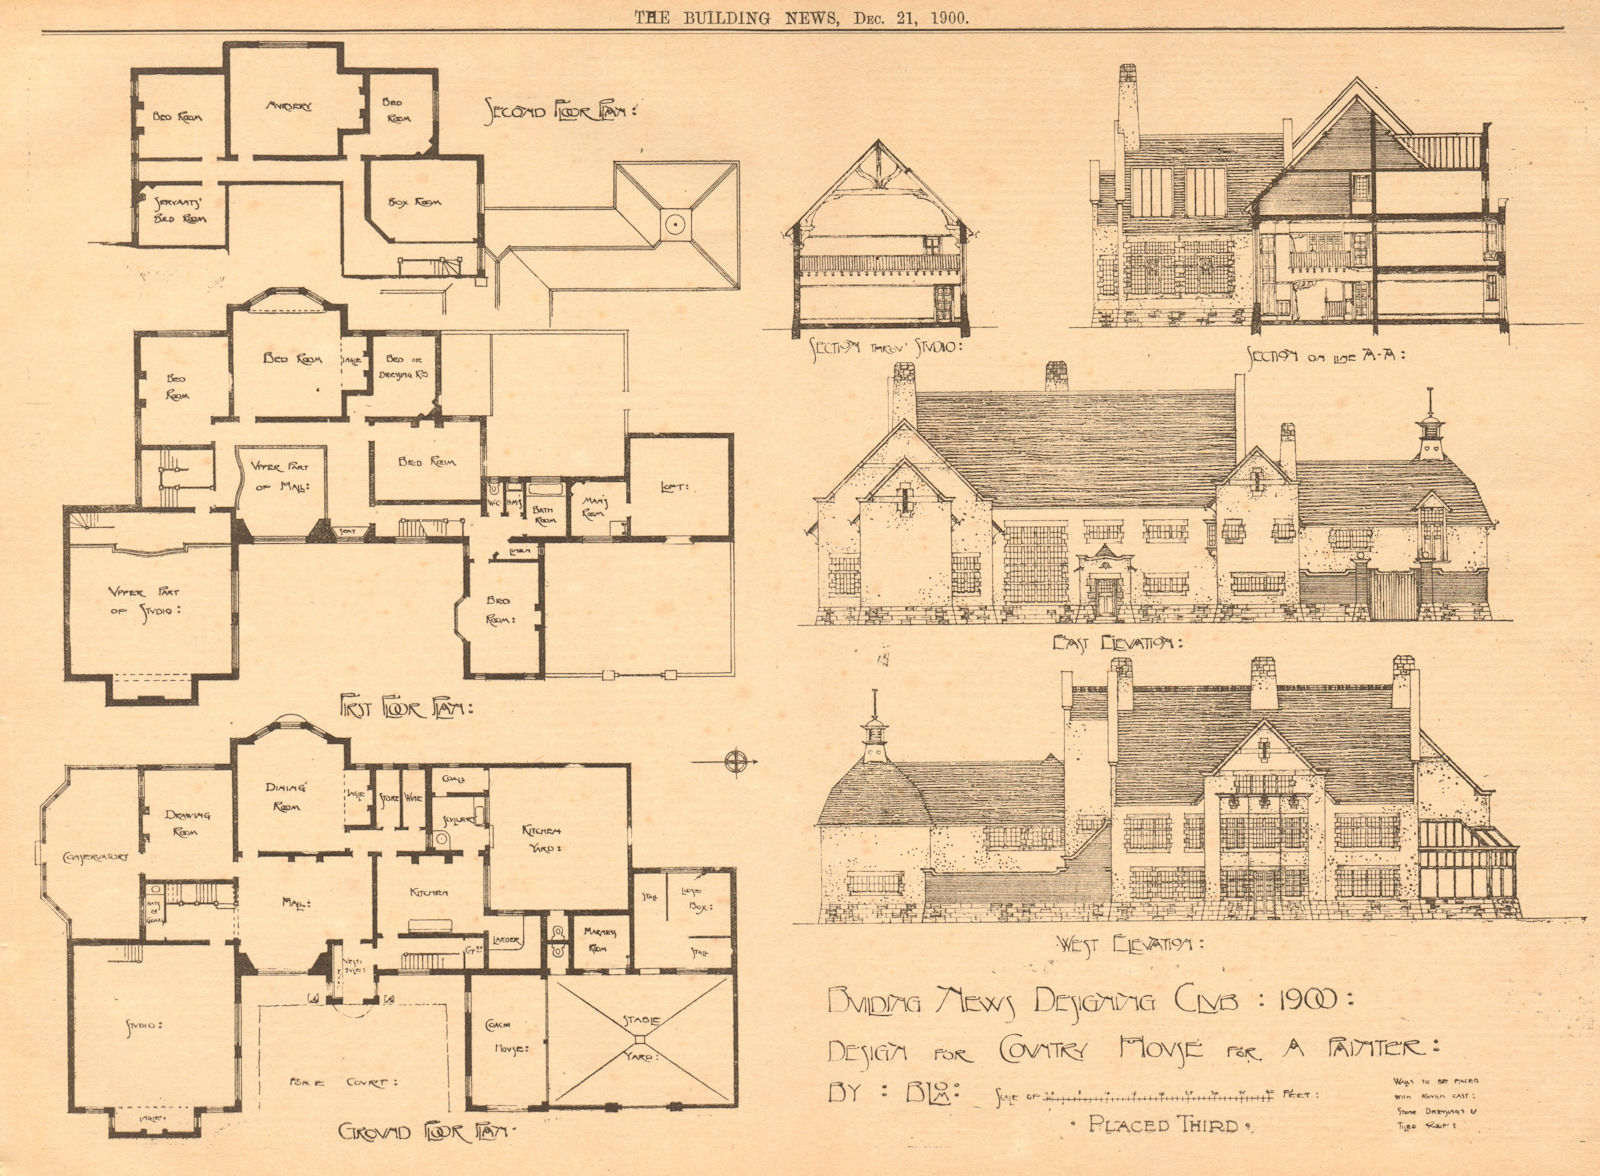 Associate Product Design for country house for a painter by Blom. Plan 1900 old antique print